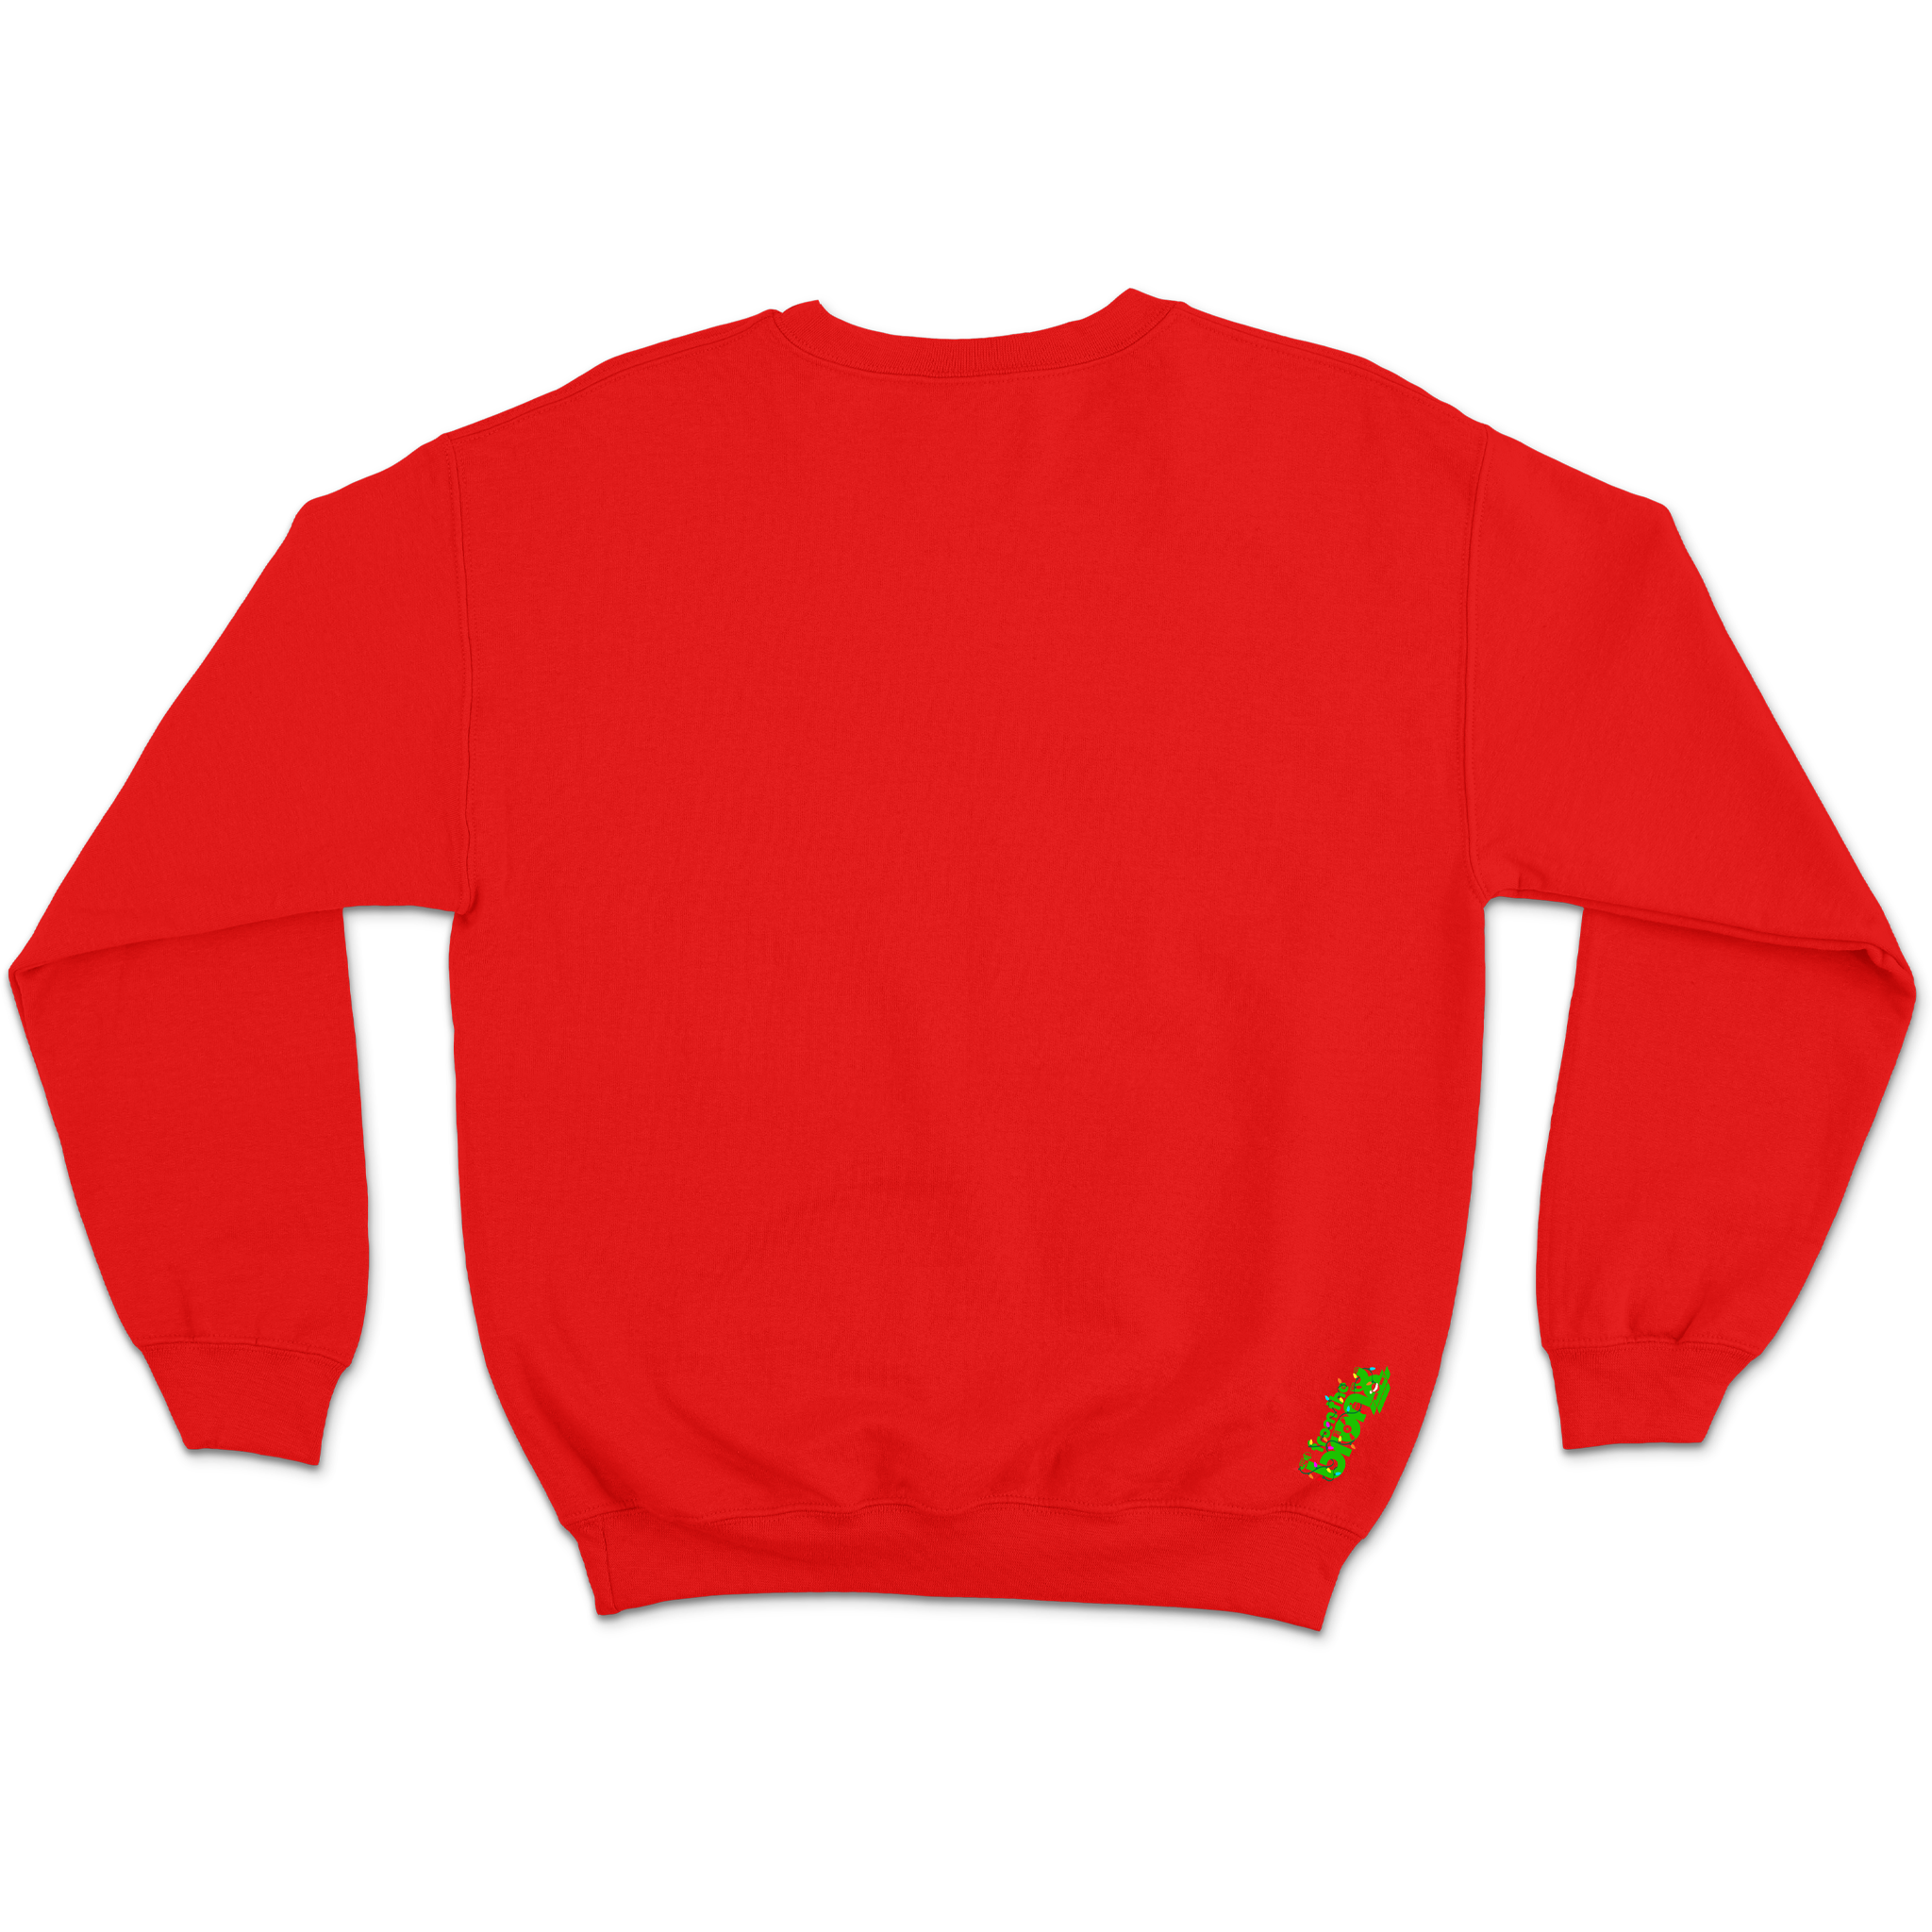 Merry BXmas Holiday Crewneck Back in Red